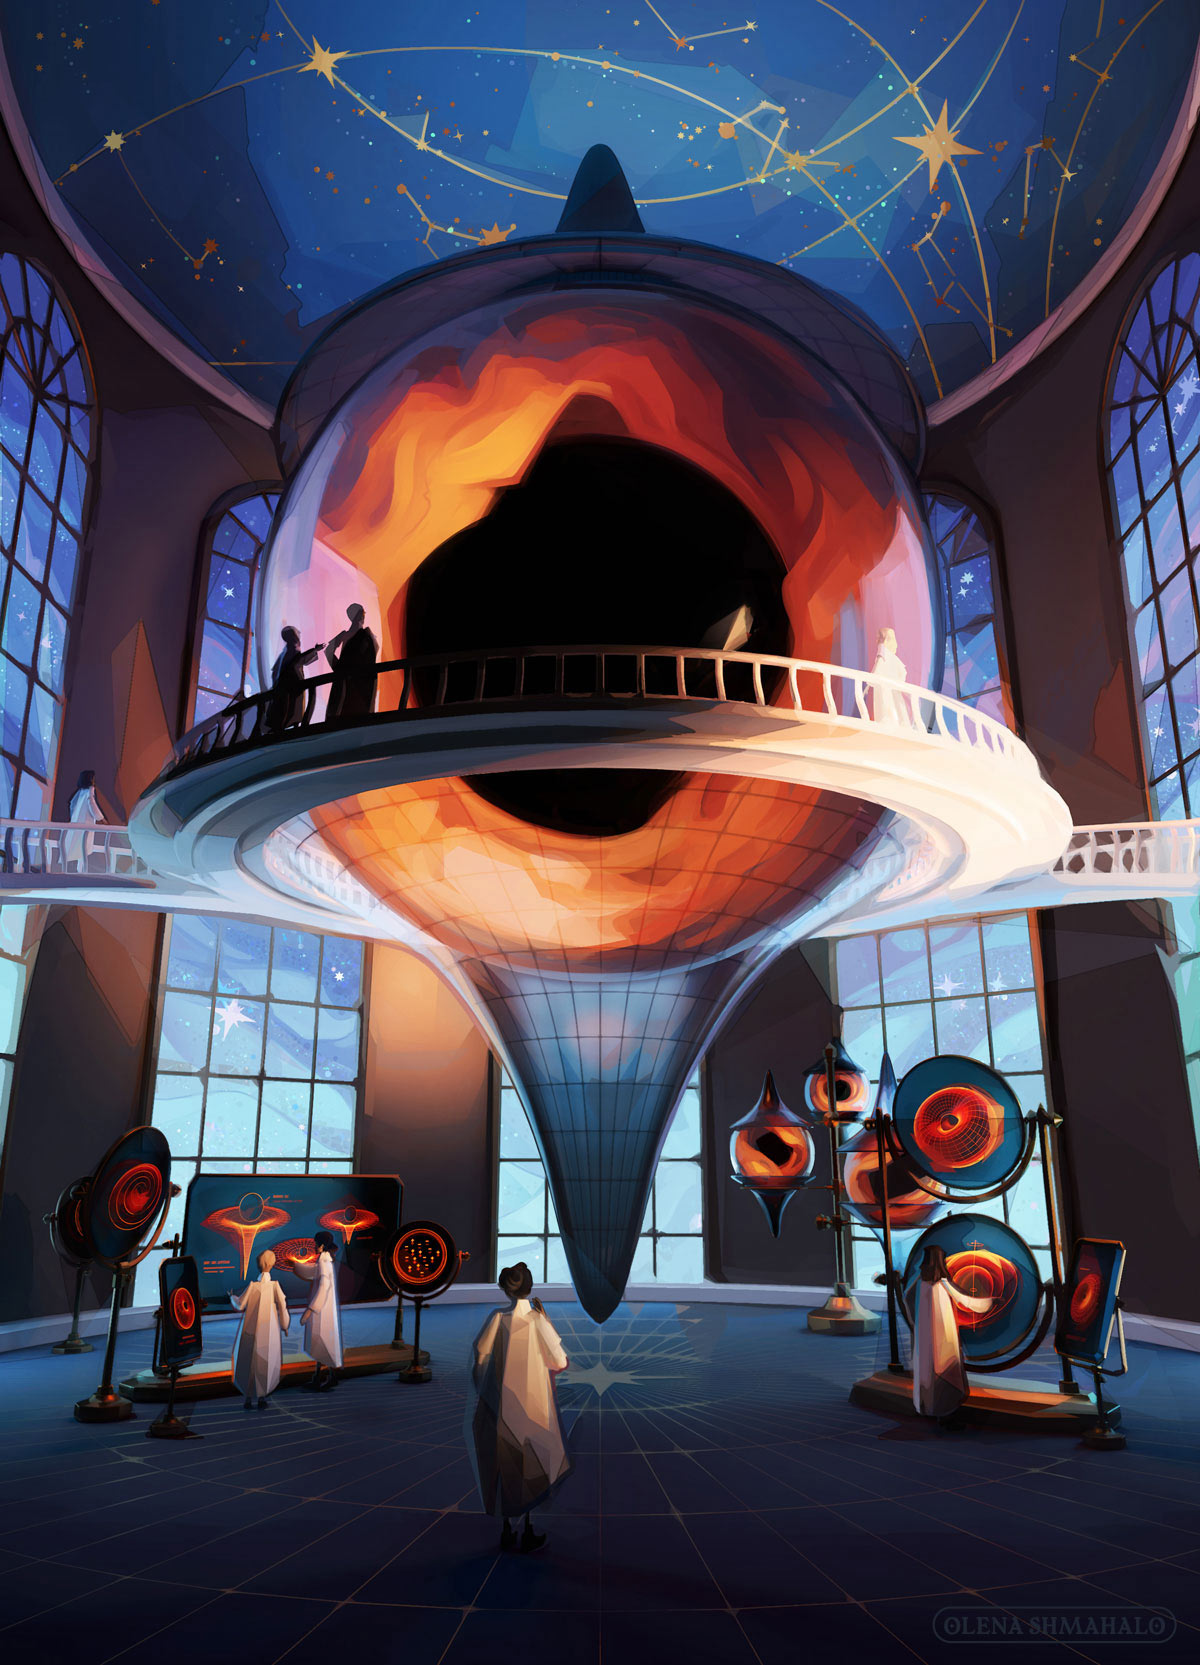 Painting of a black hole laboratory in a retro-futuristic style. Researchers observe glass screens displaying black hole graphics in orange. In the room's center: a giant glass sphere containing a model black hole with orange accretion clouds, surrounded by a viewing balcony.